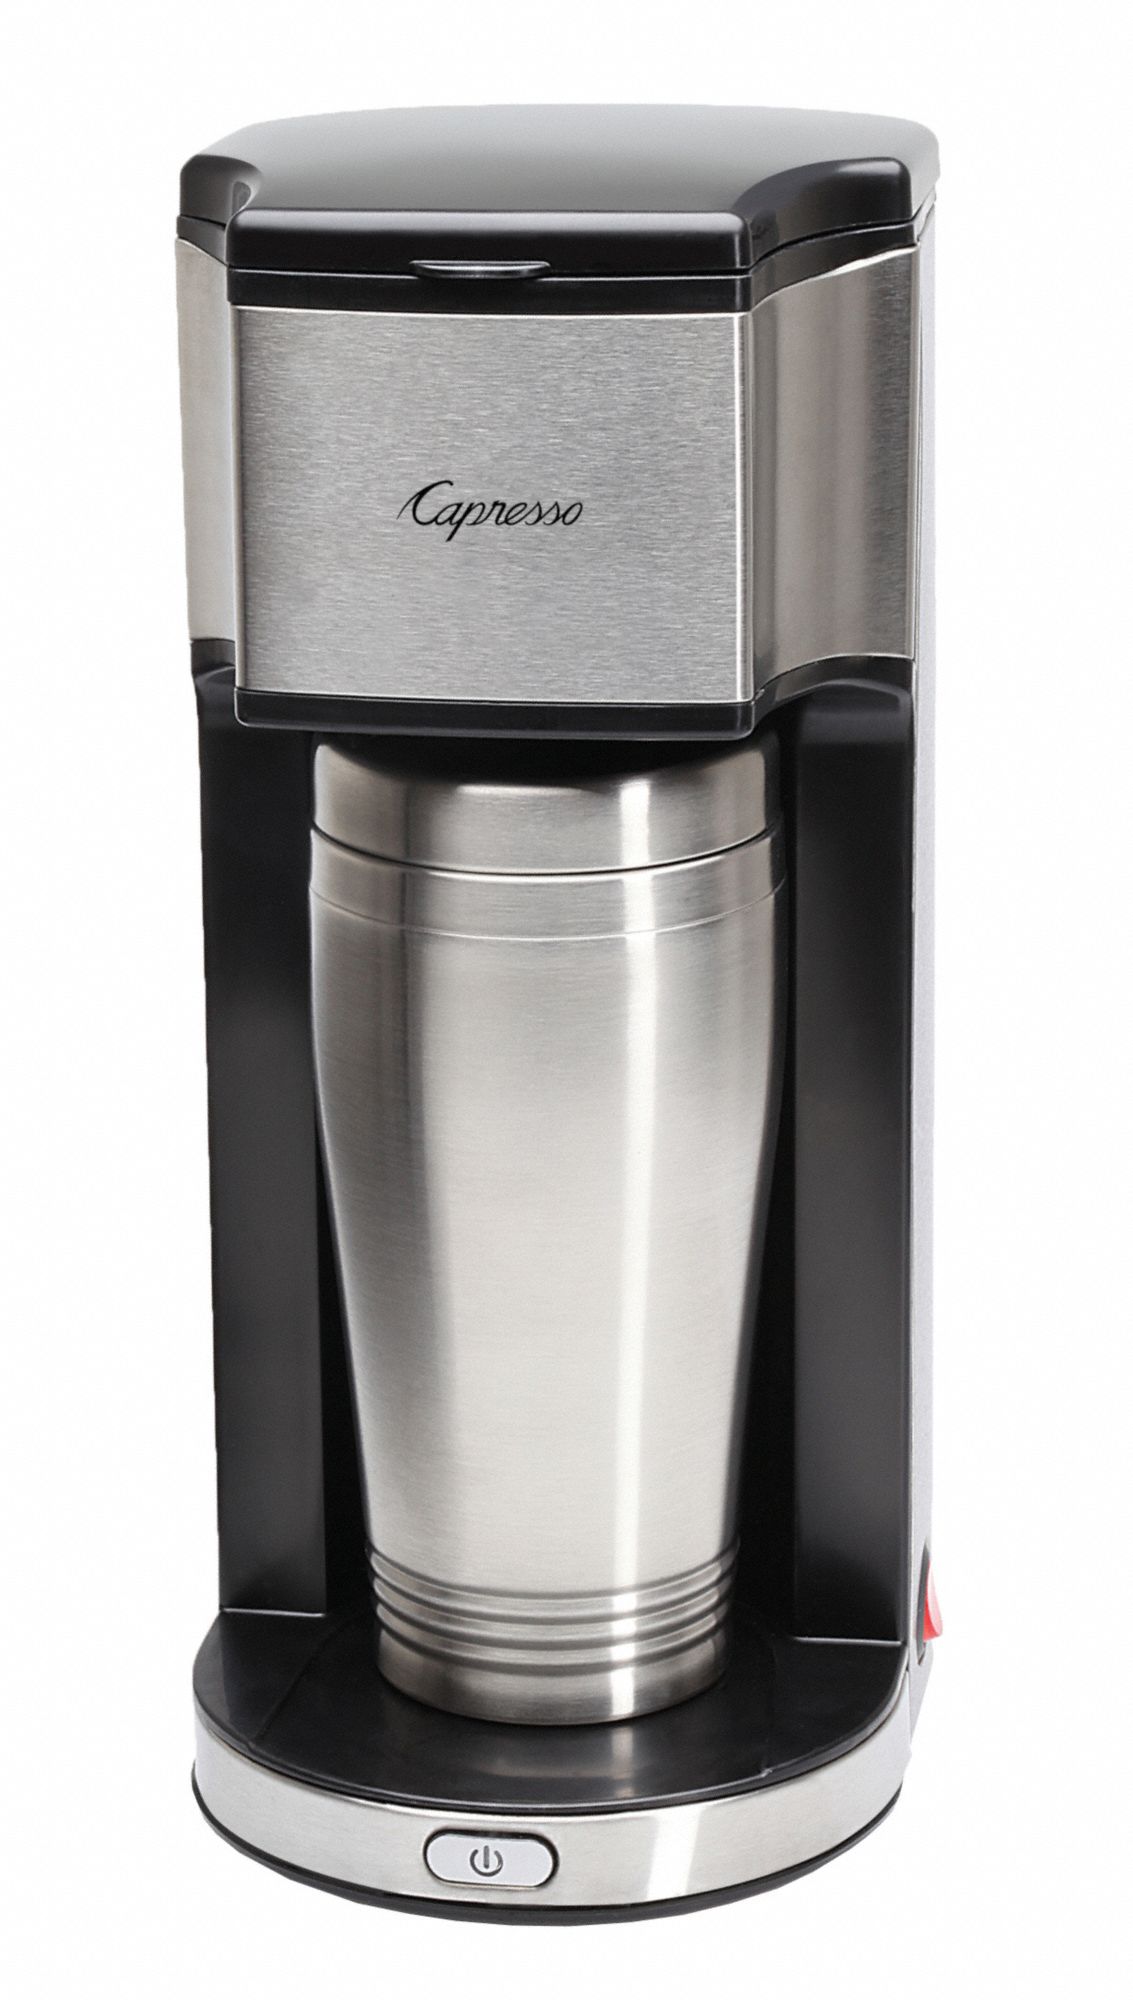 Personal Coffeemaker: 16 fl oz Max Brewing Capacity, Silver, 12 in x 5 1/4 in x 6 1/2 in